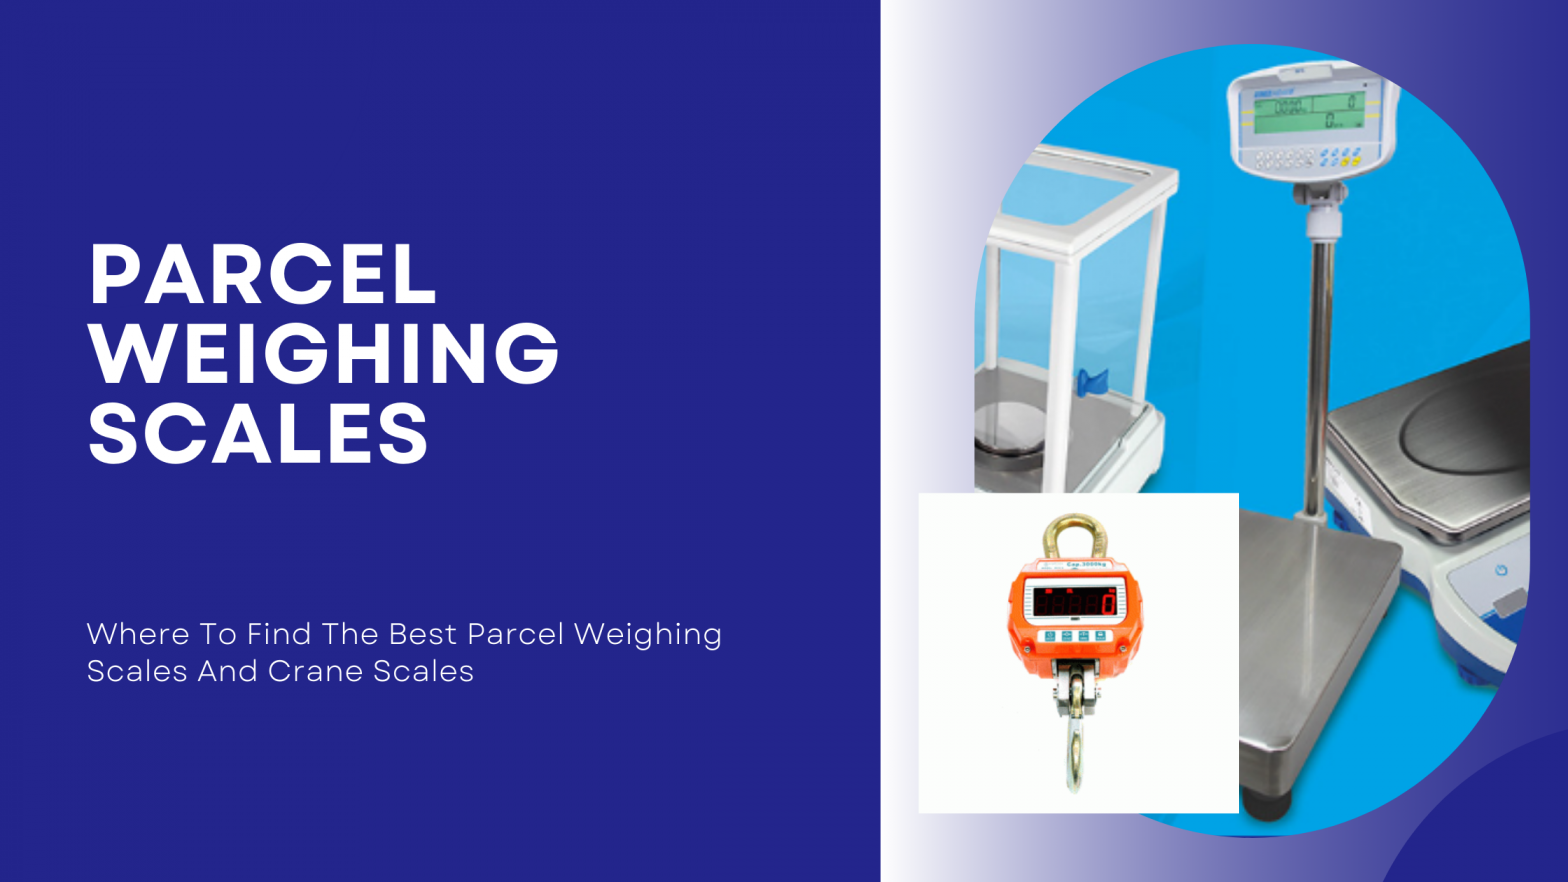 Parcel Weighing Scales